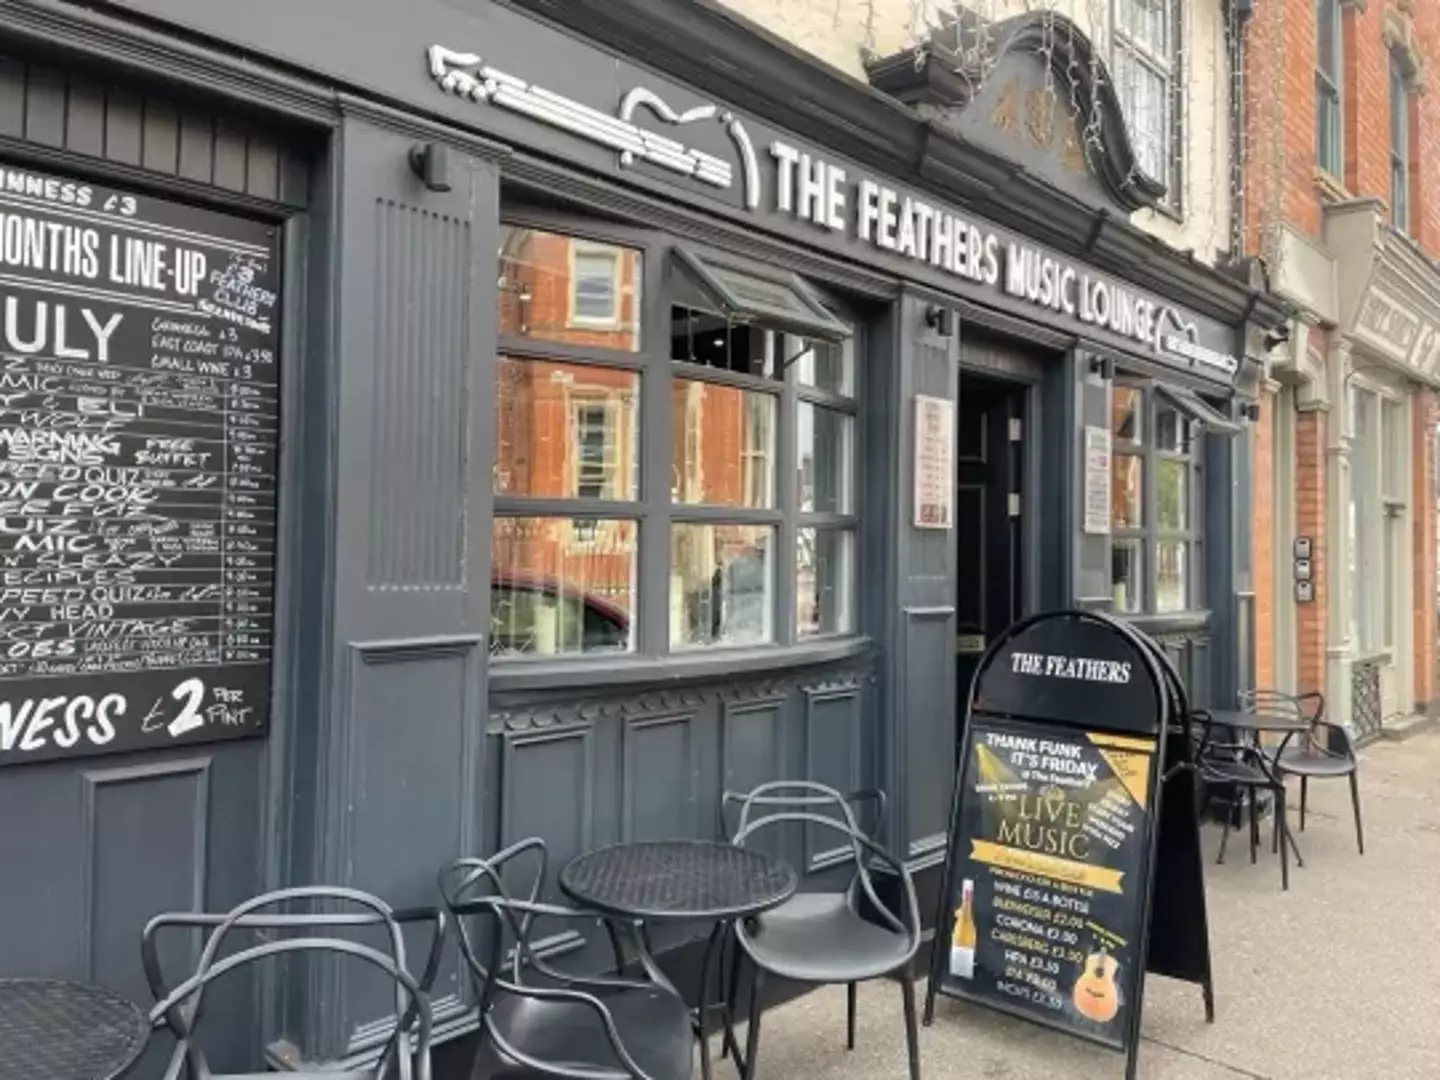 A pub claims it sells the 'cheapest pint of Guinness' in the UK.